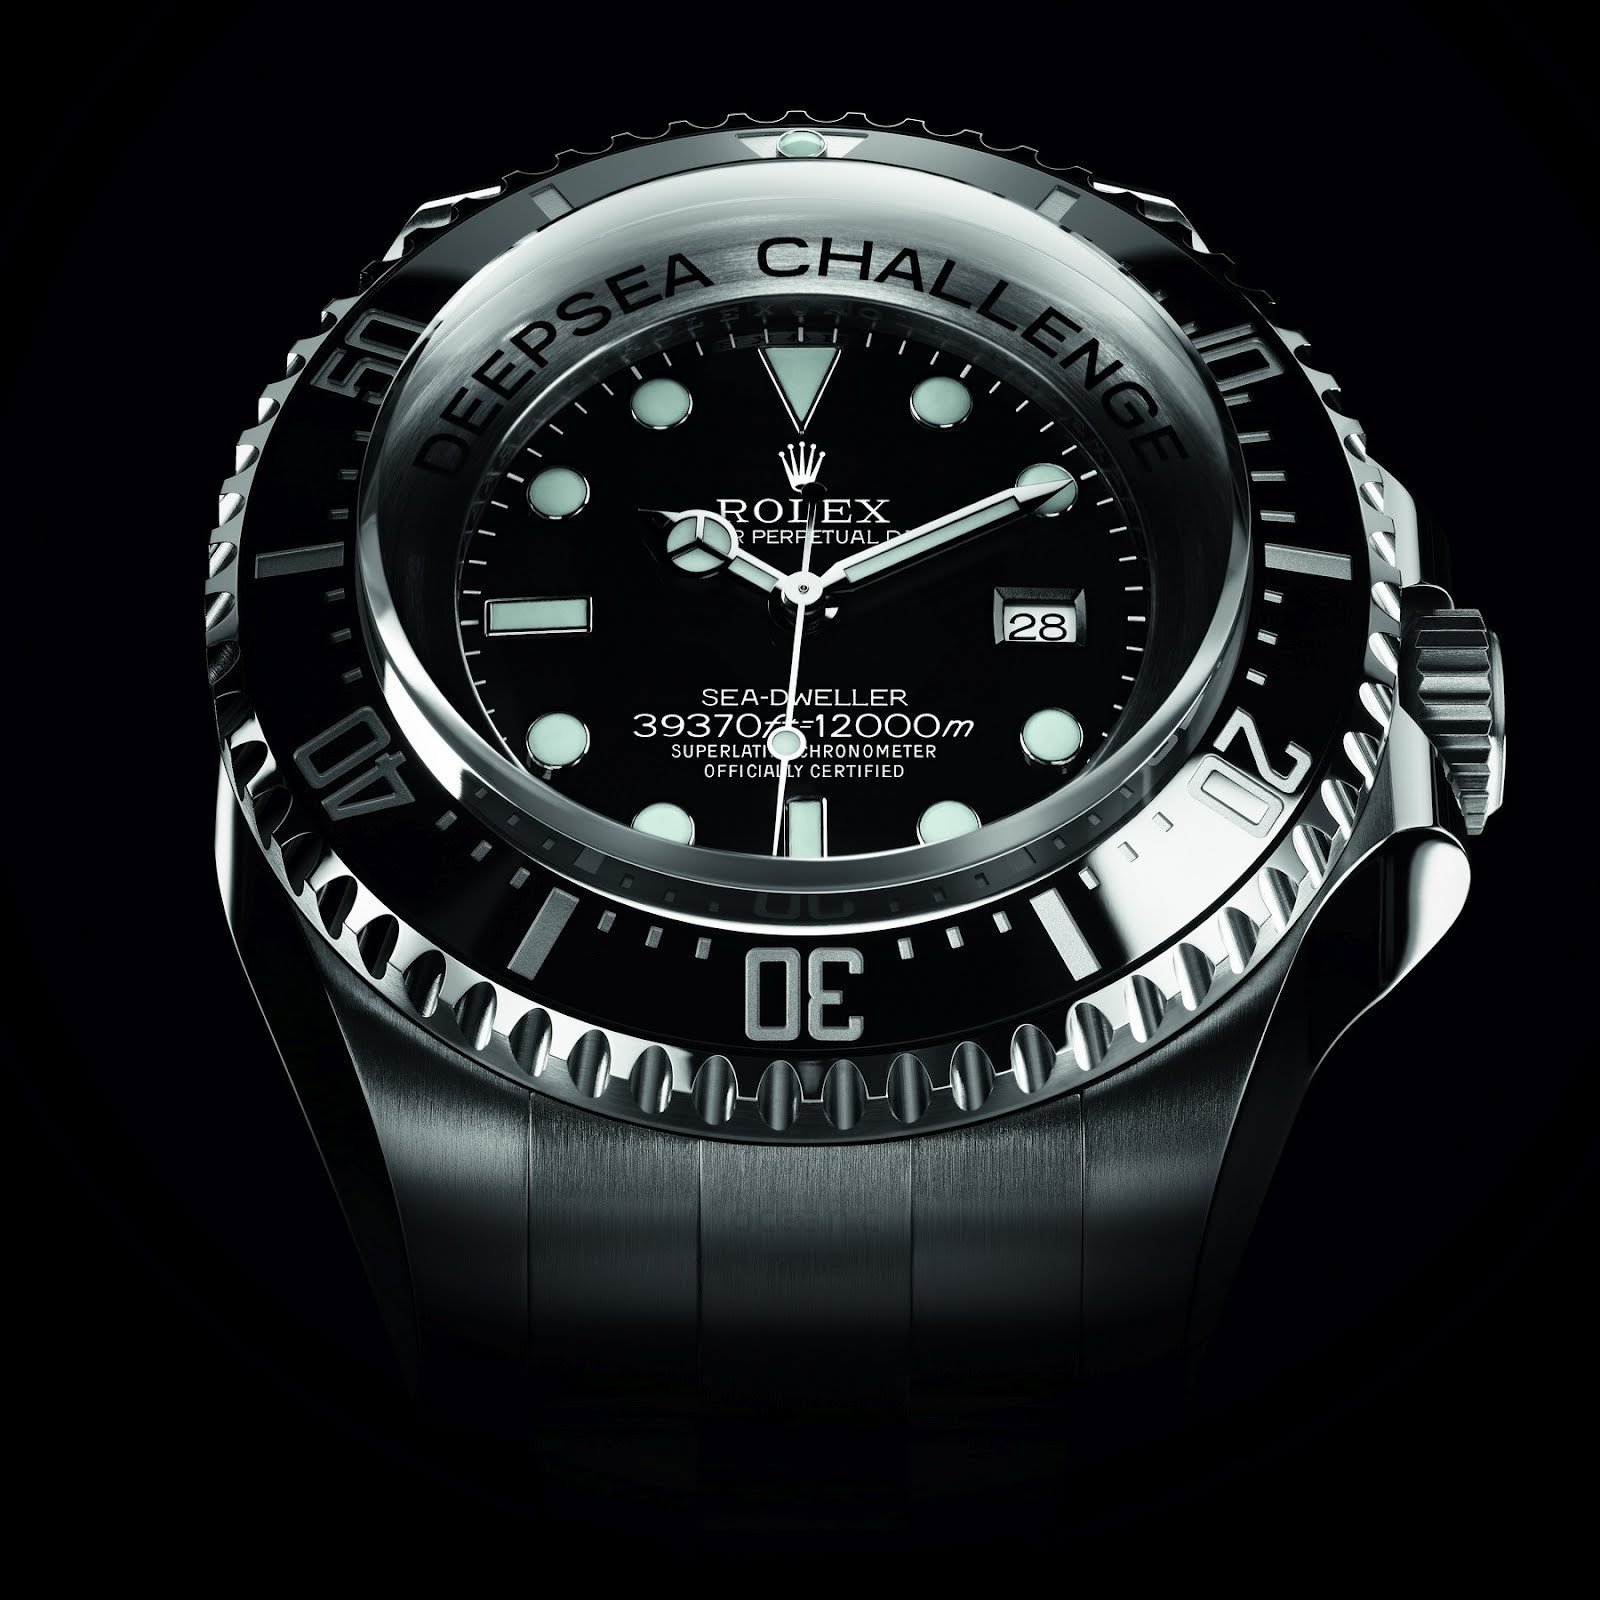 in 1960 an experimental rolex deepsea special watch was attached